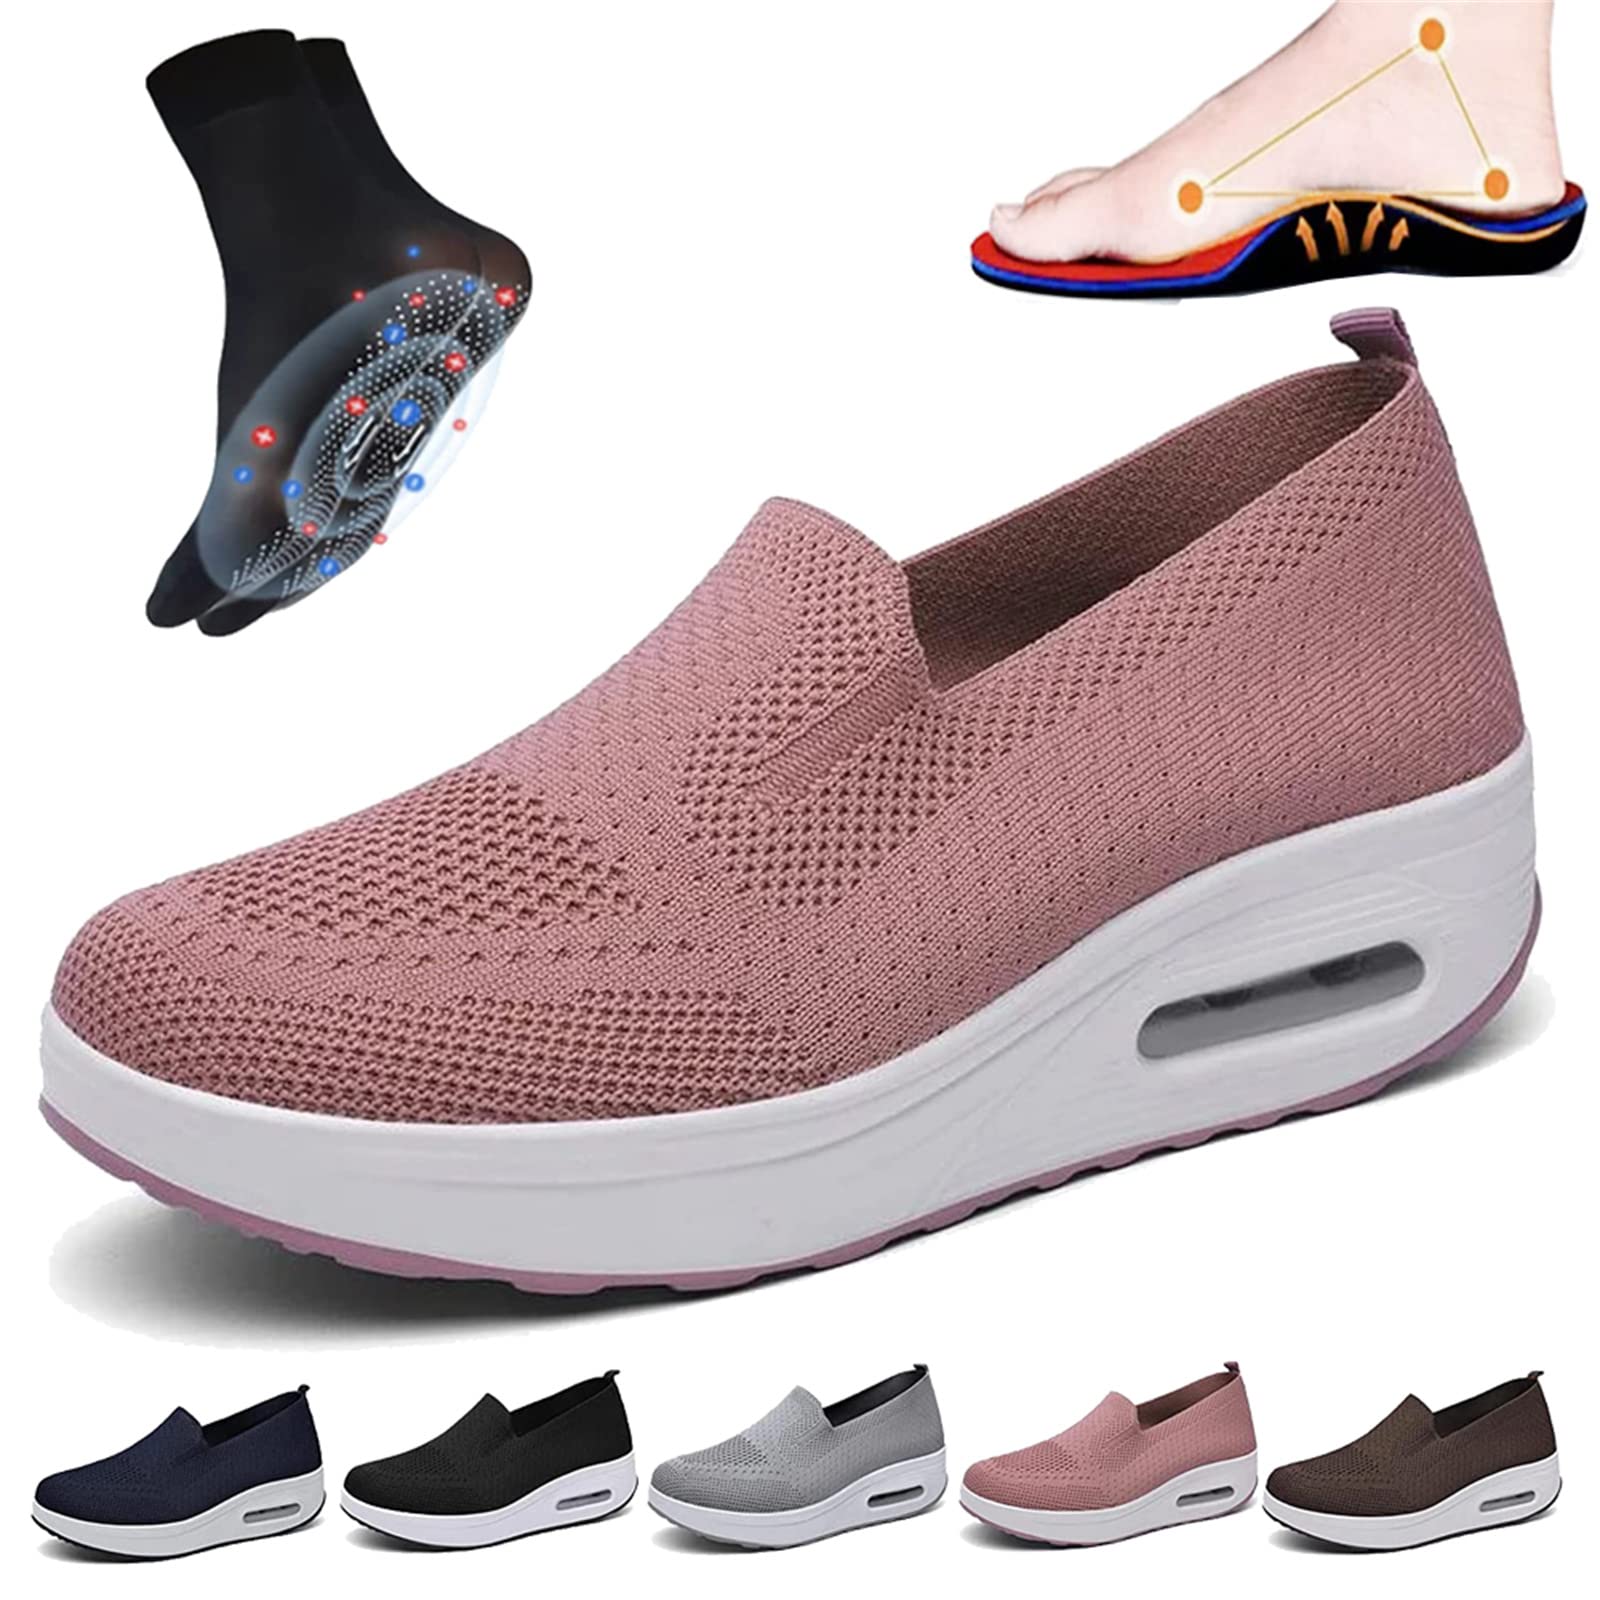 Fitsshoes Women slip-on light air cushion orthopedic Sneakers – fitsshoes